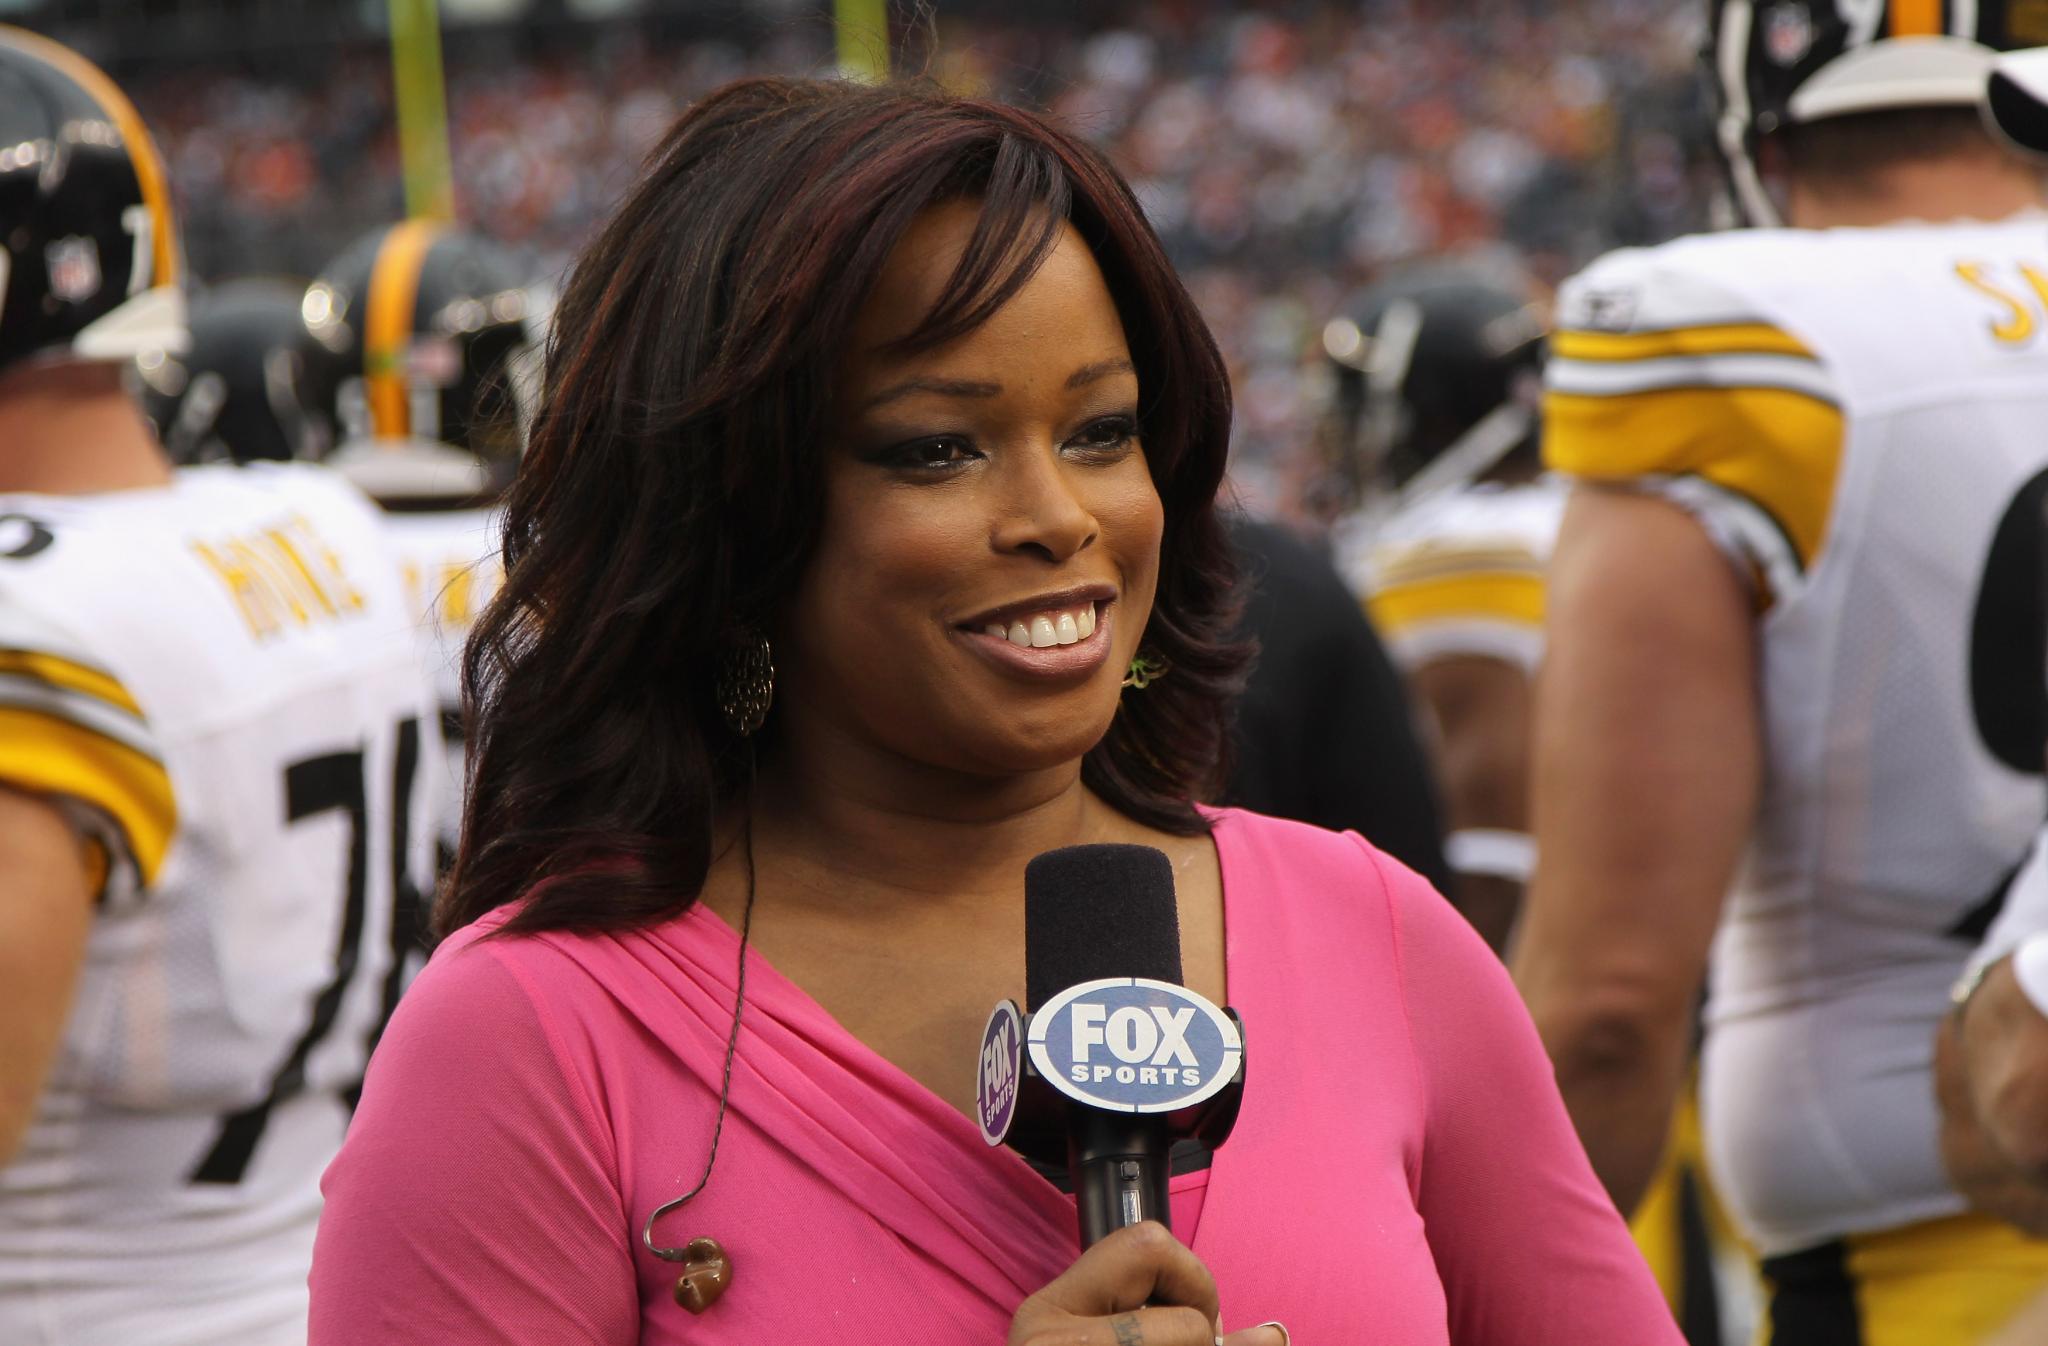 Fox Sports' Pam Oliver to Be Replaced By Erin Andrews